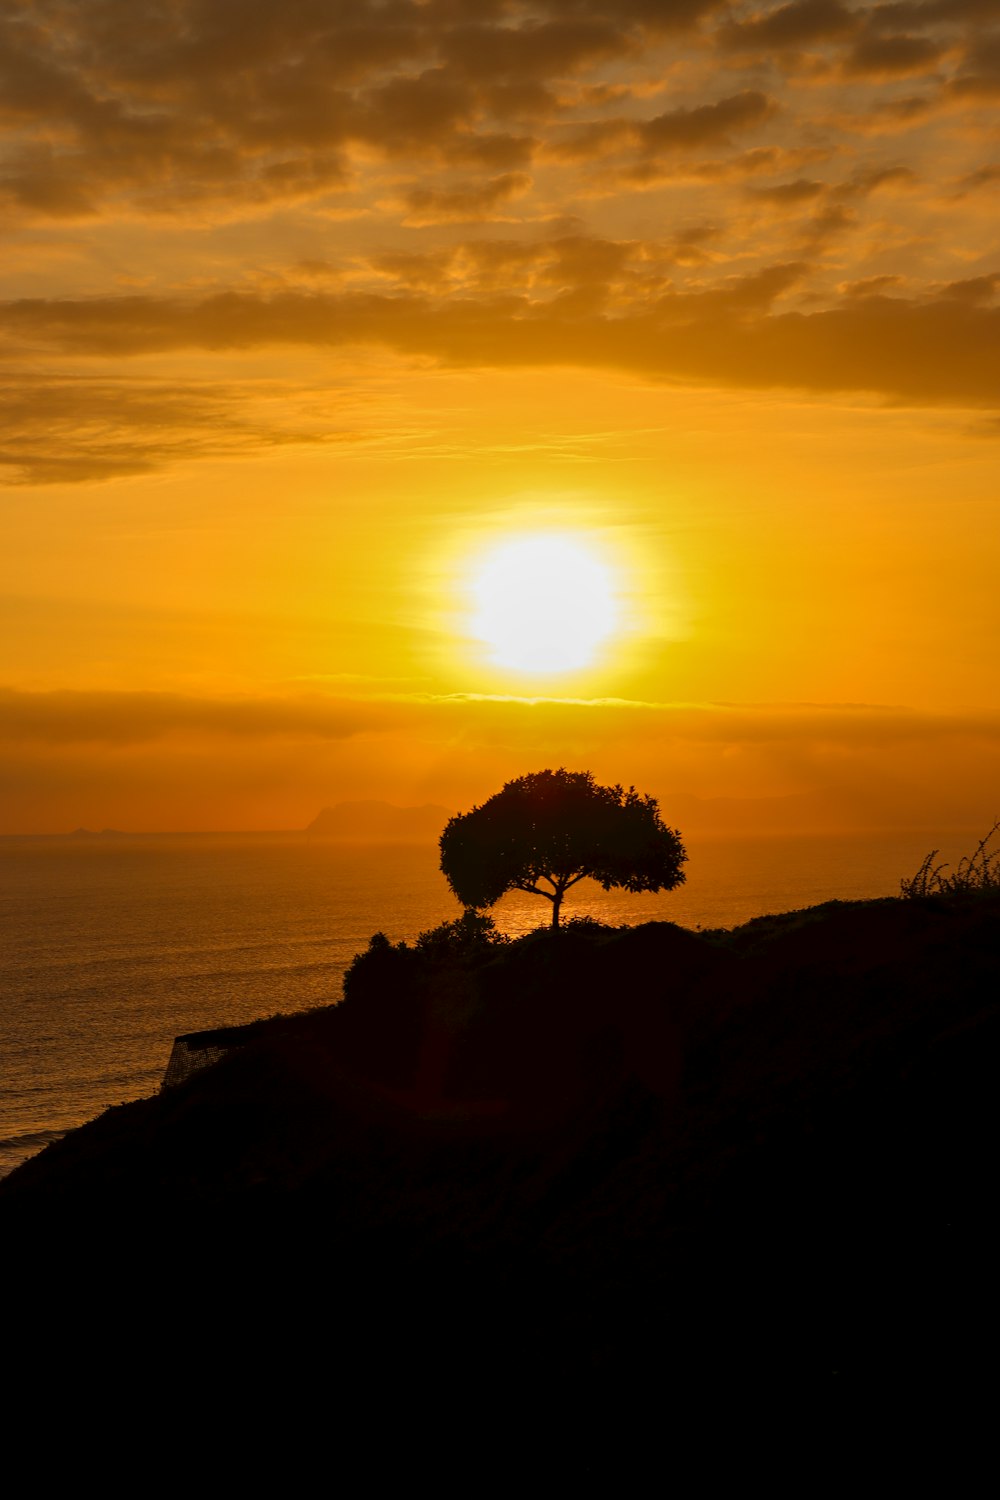 a lone tree on a hill at sunset